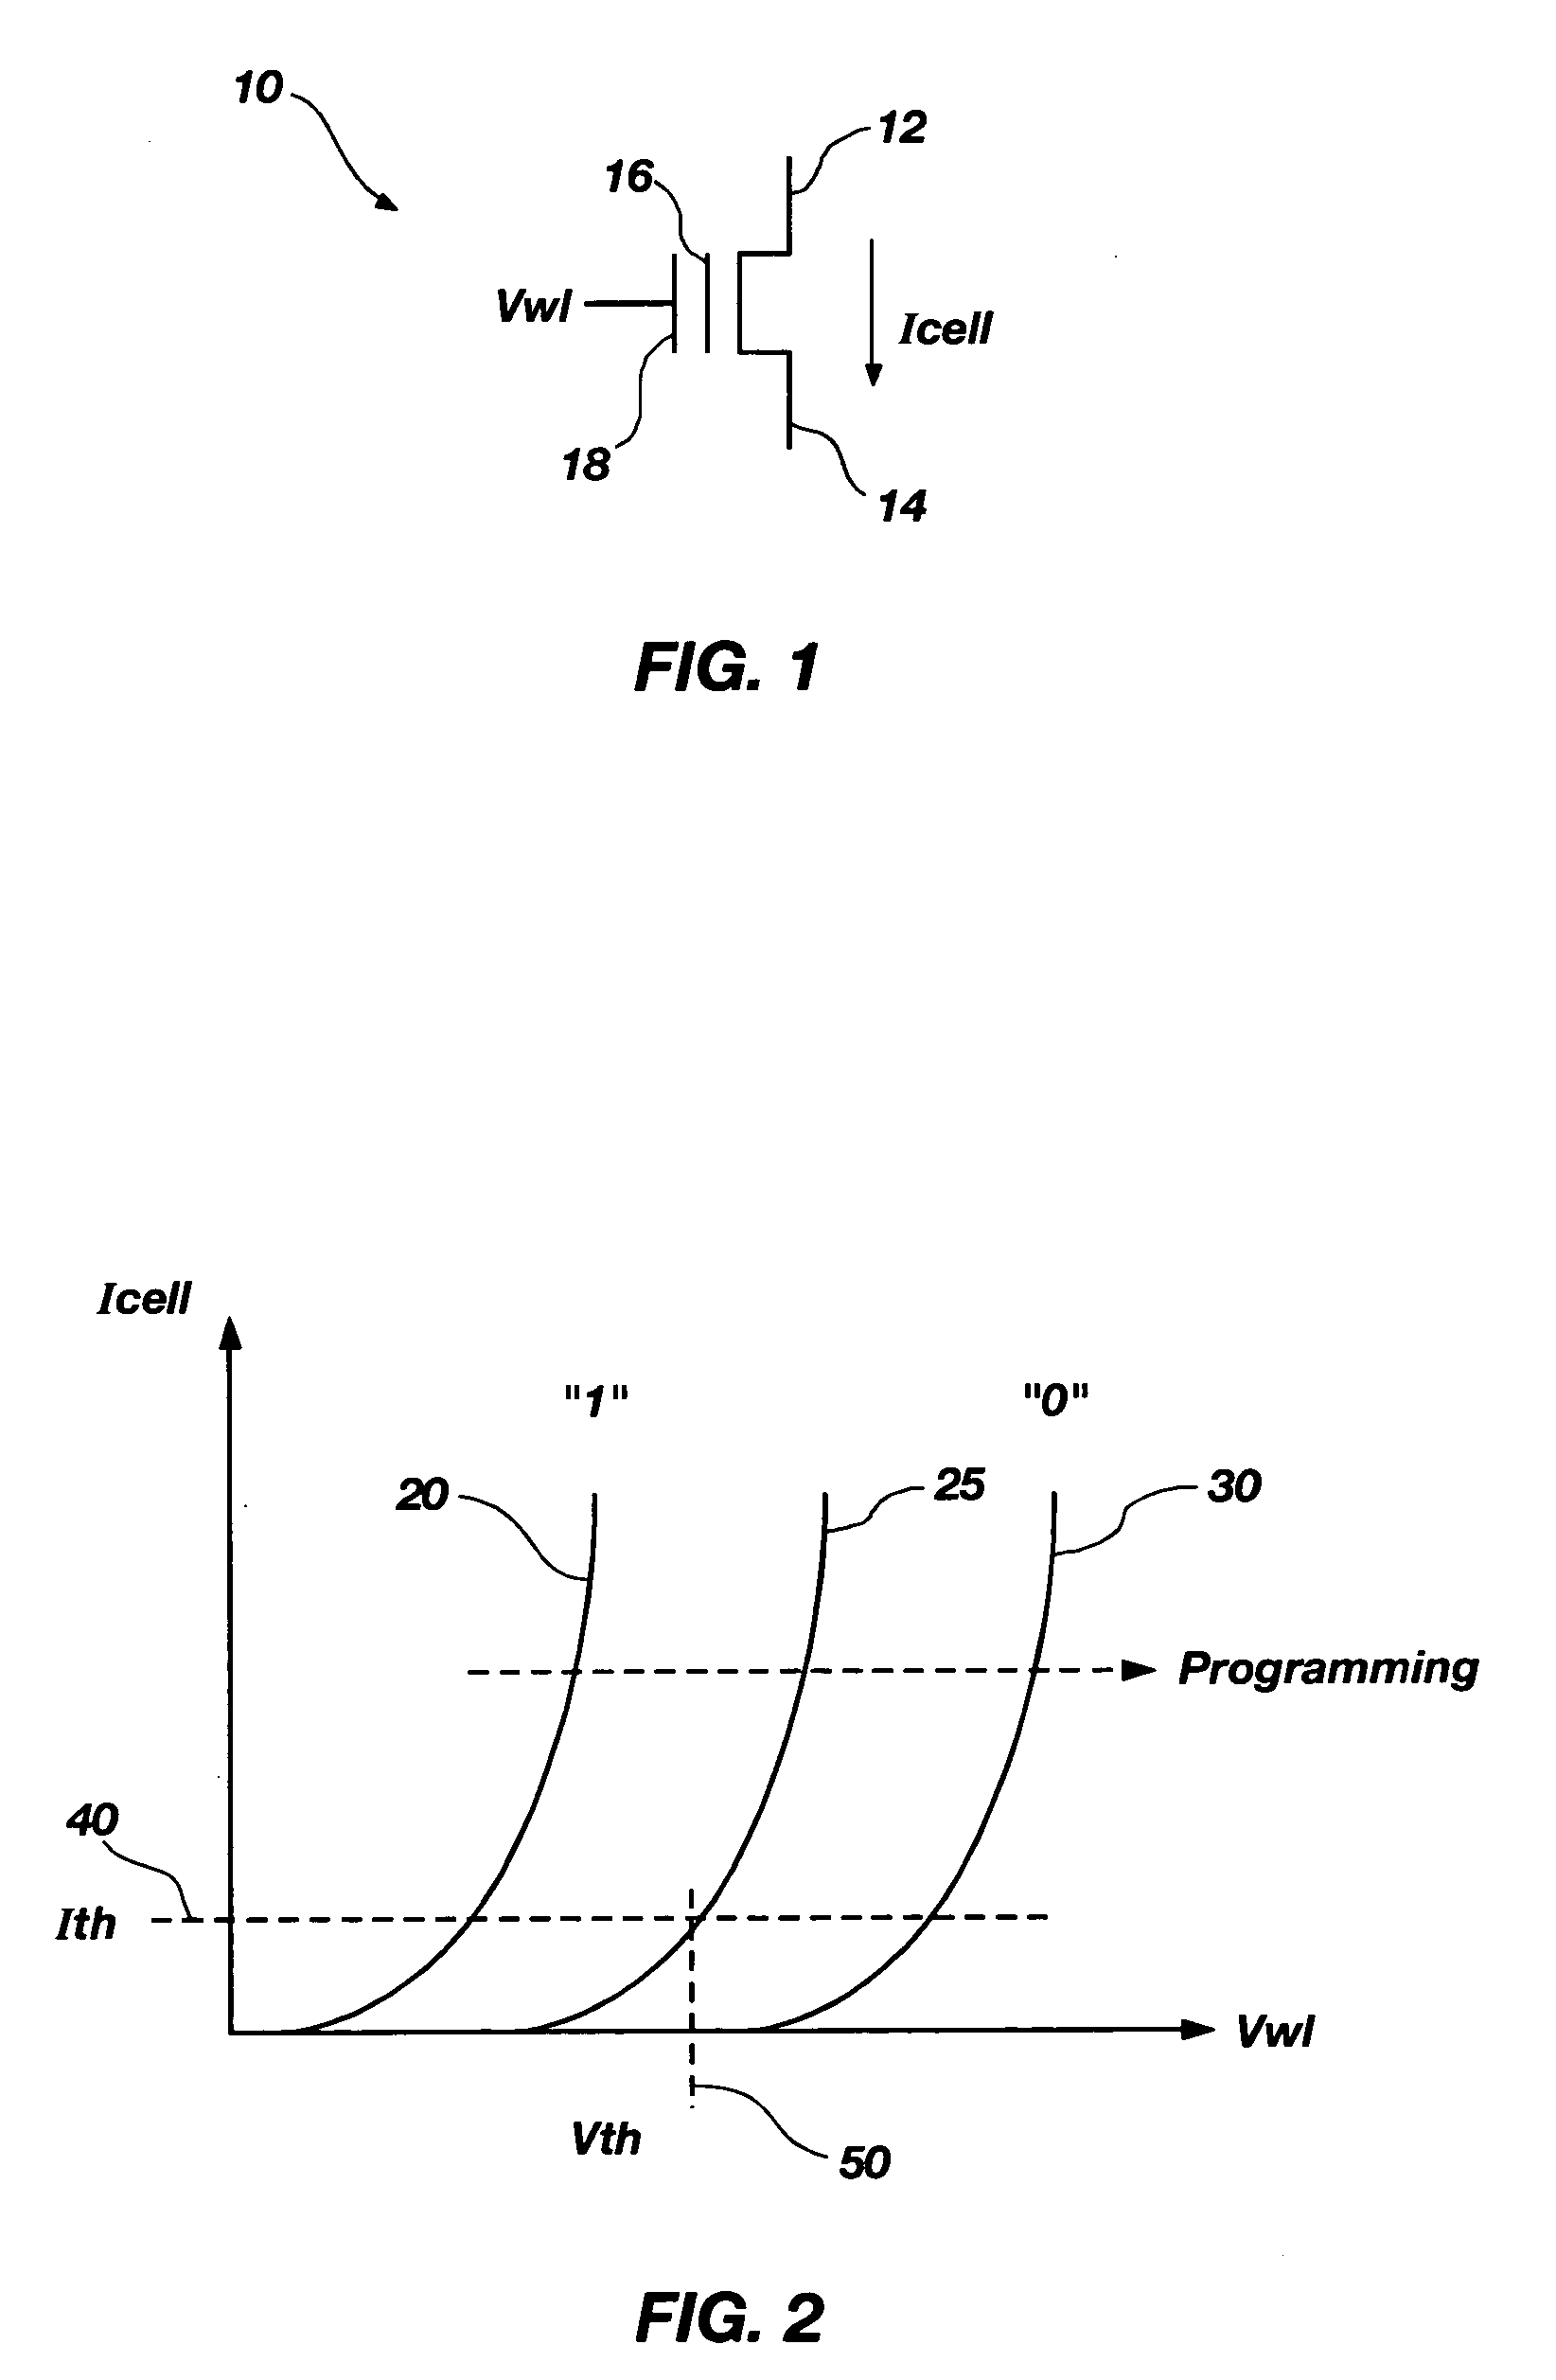 Method and apparatus for generating temperature-compensated read and verify operations in flash memories